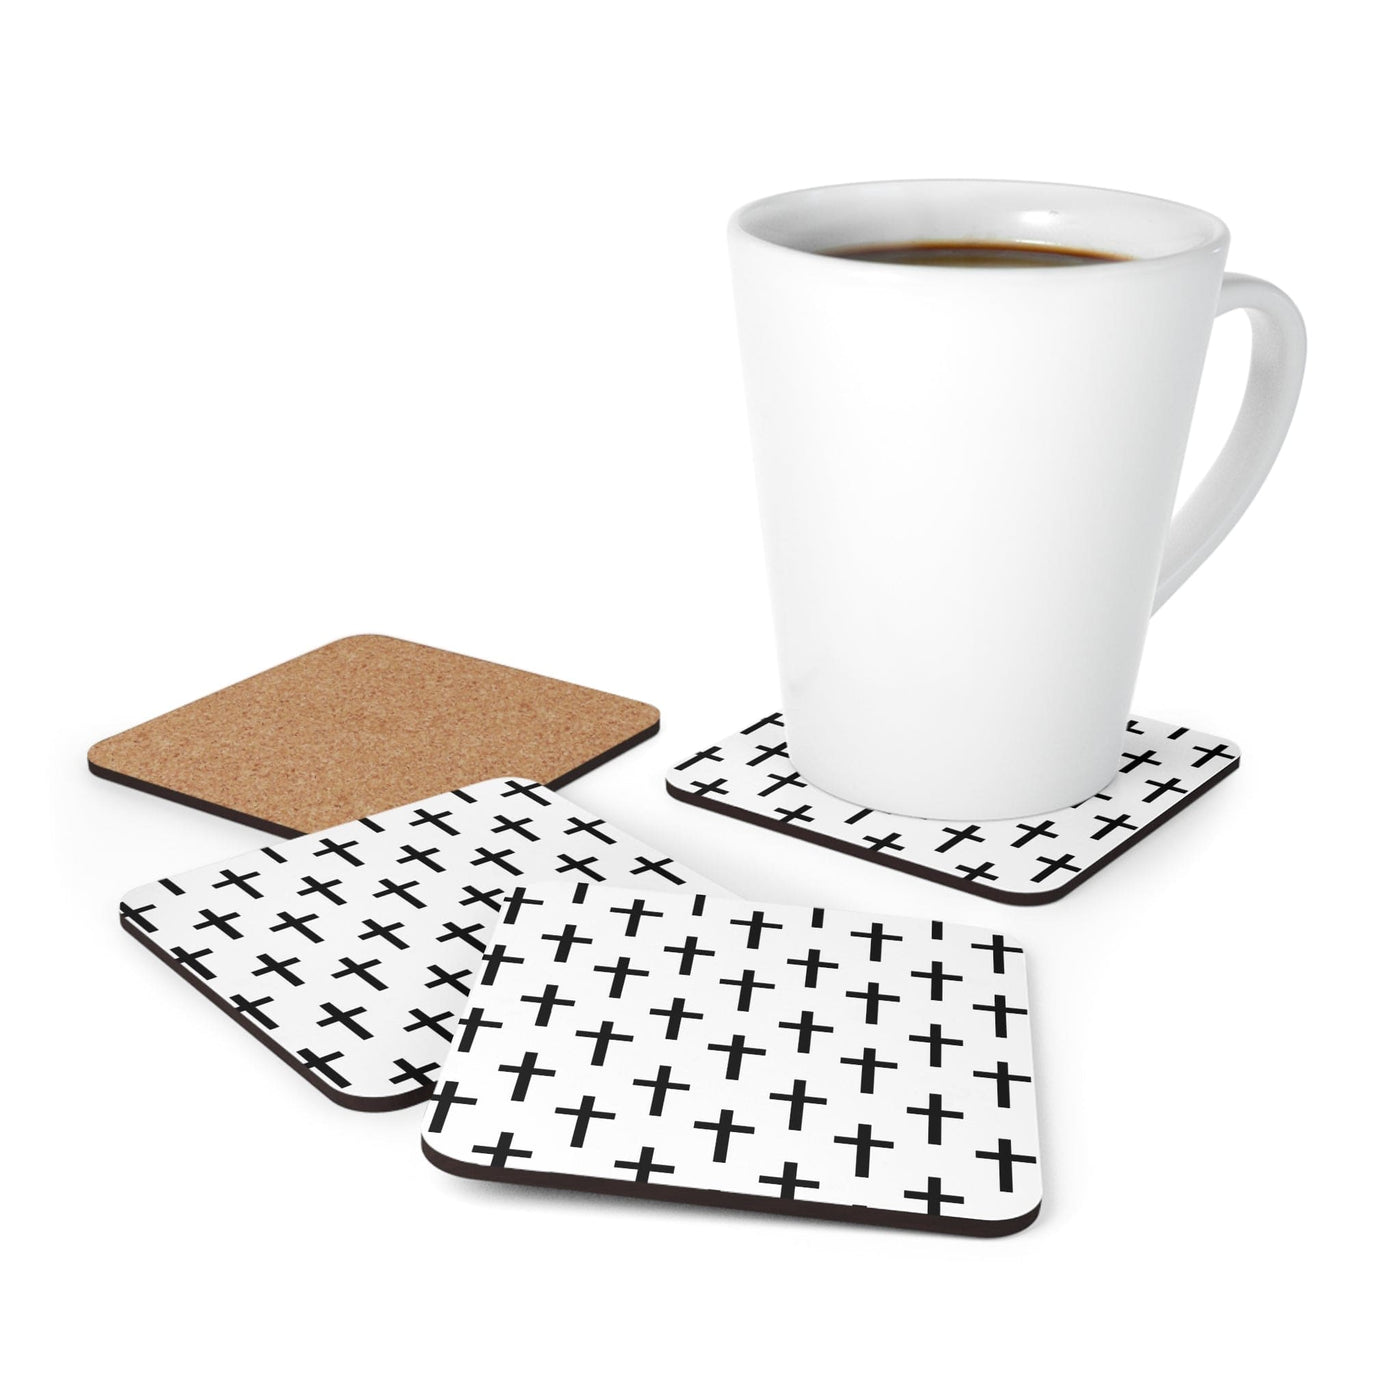 Handcrafted Square Coaster Set Of 4 For Drinks And Cups Seamless Cross Pattern